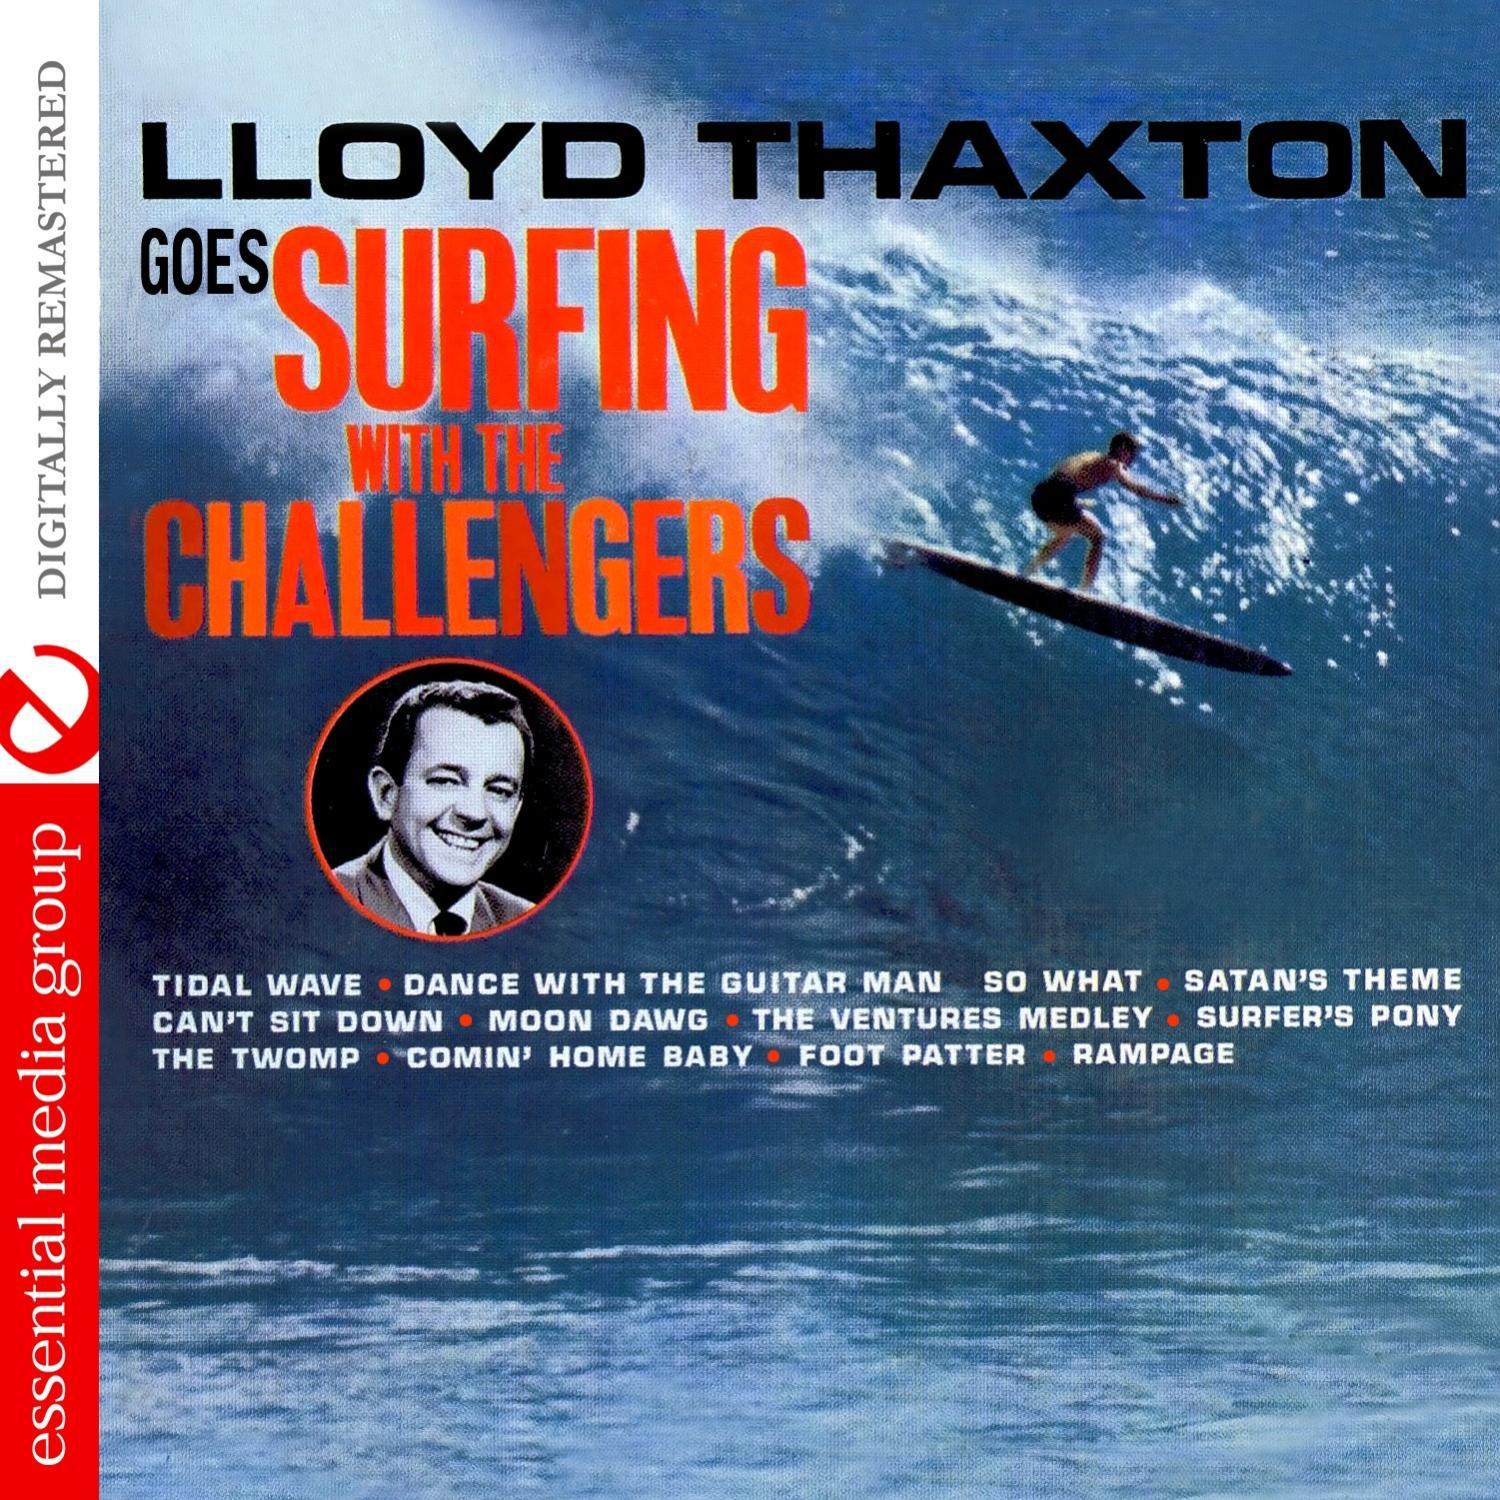 Lloyd Thaxton Goes Surfing With The Challengers (Remastered)专辑